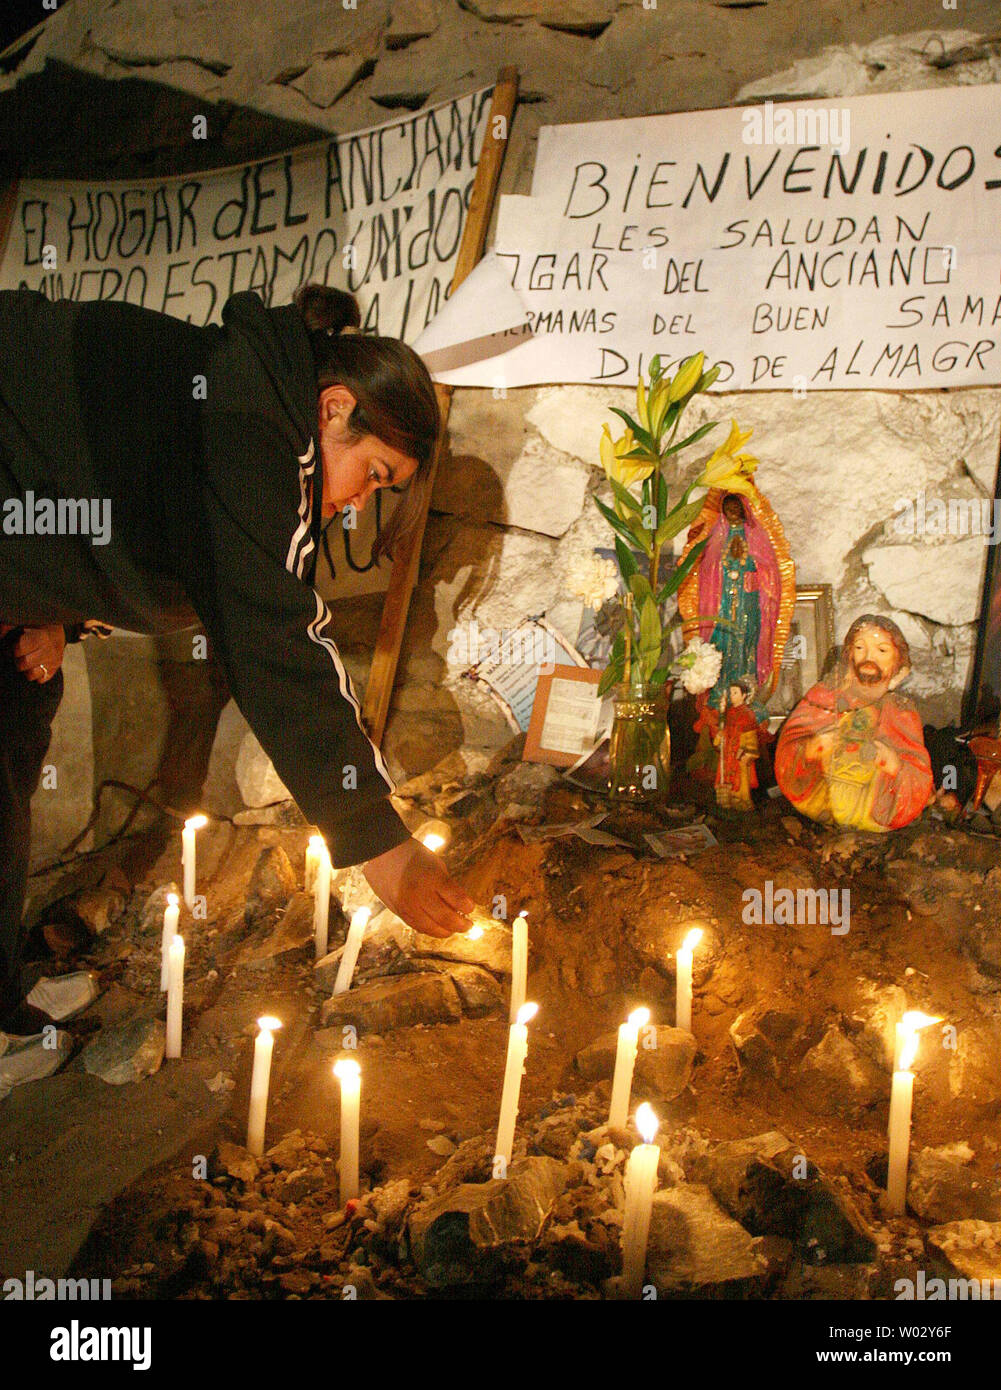 Relatives light candles near religious symbols as preparations continue to rescue the 33 trapped miners at San Jose Mine, Chile on October 12, 2010.   If all goes well, officials say the first miners will be brought up within a day via a 20-minute ride in a rescue capsule more than 2,000 feet below the surface.   The miners have been trapped for more than two months.   UPI/Sebastian Padilla Stock Photo